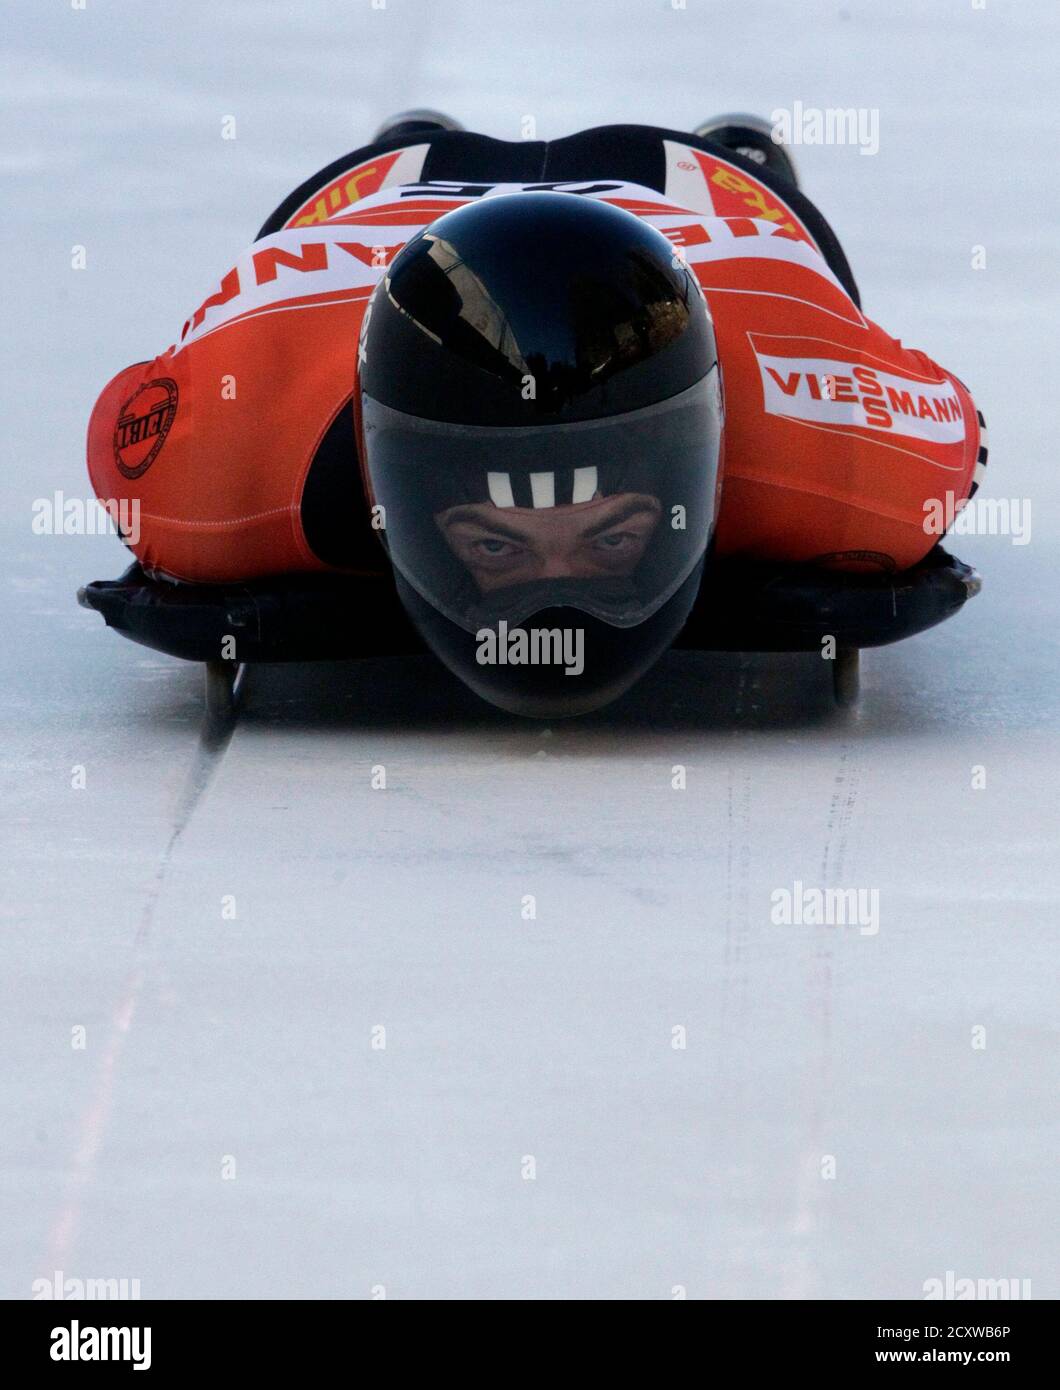 Ben Sandford of New Zealand speeds down the first run to finish thrid of the men's skeleton event at the FIBT World Cup in St. Moritz January 28, 2011.  REUTERS/Denis Balibouse (SWITZERLAND - Tags: SPORT SKELETON) Stock Photo